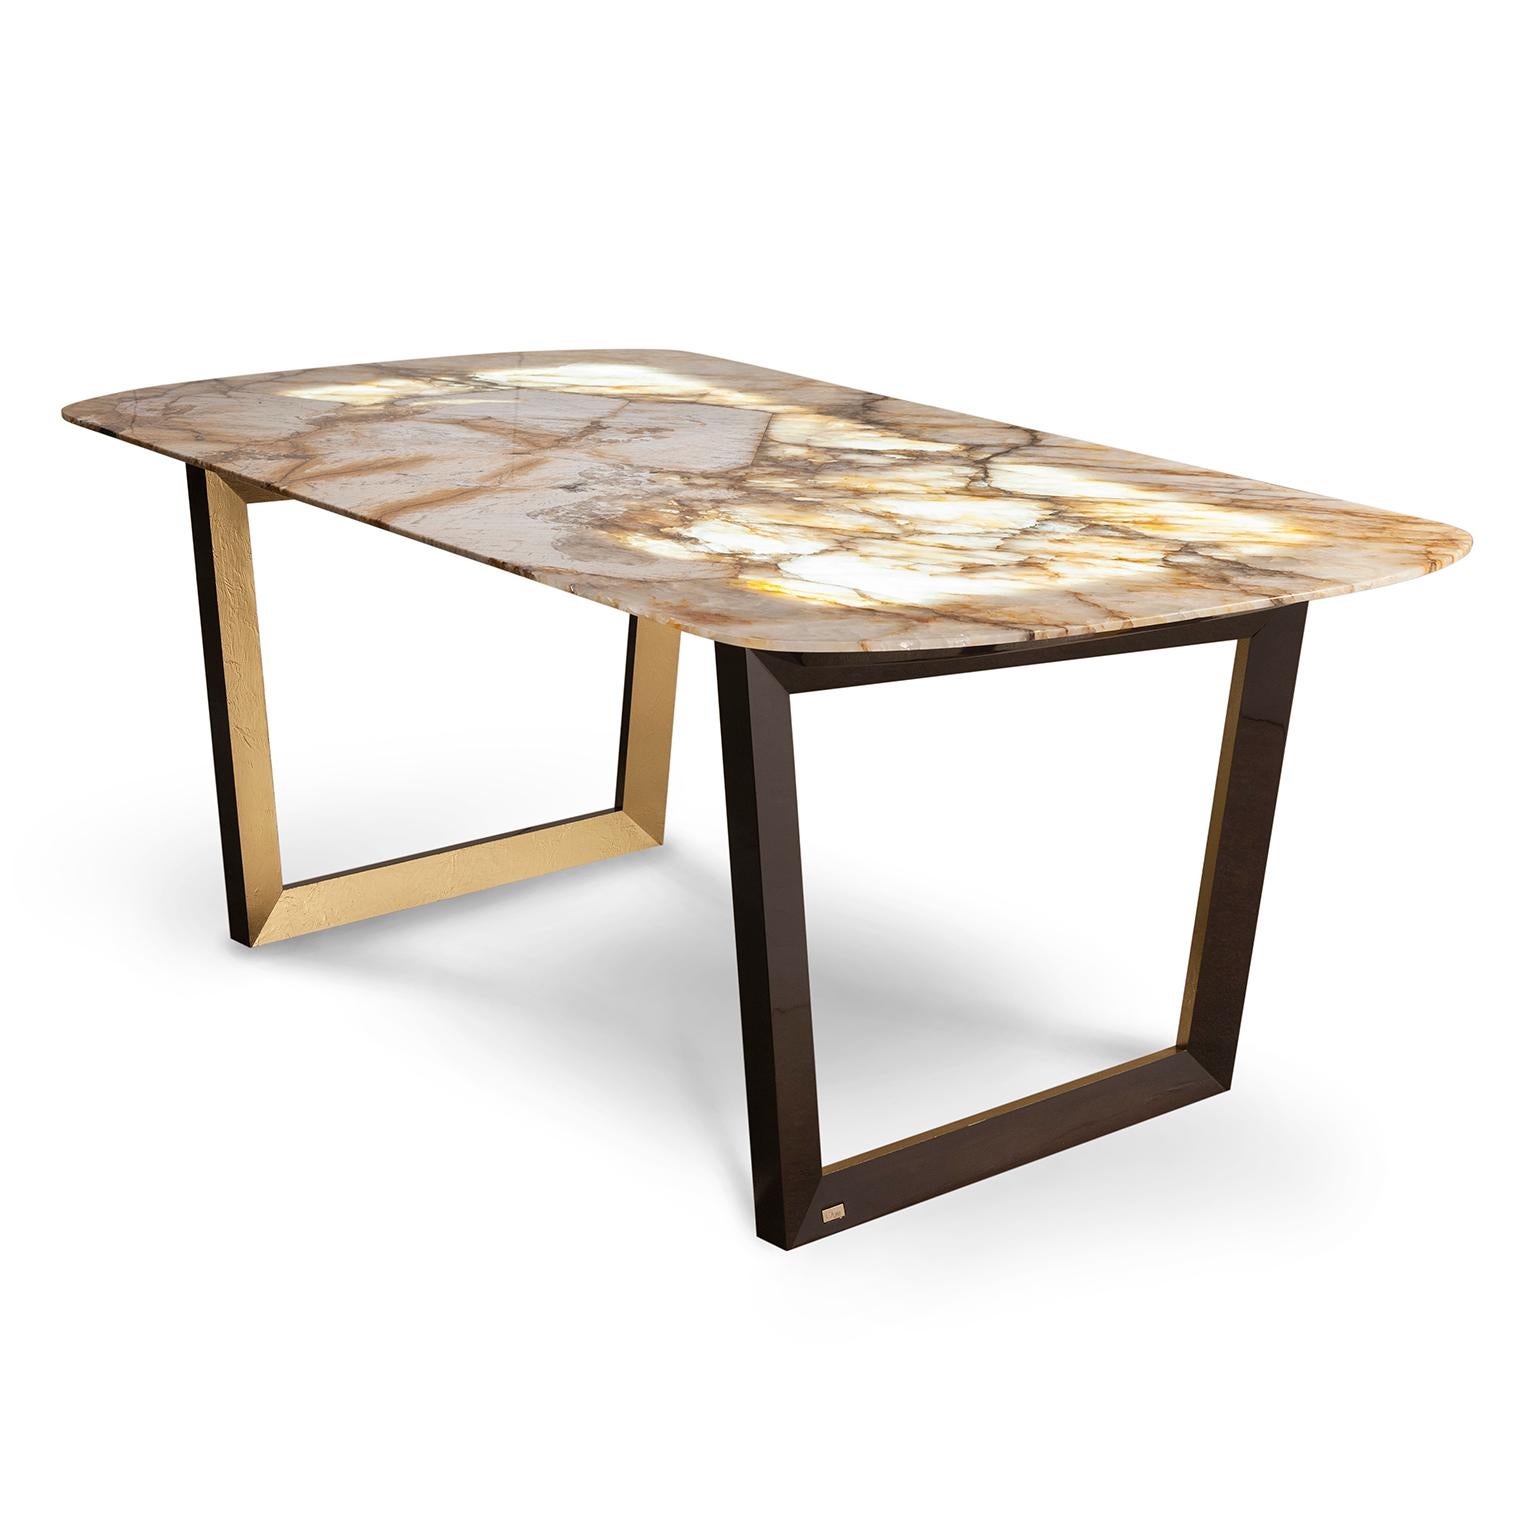 Olisippo Dining Table, Contemporary Collection, Handcrafted in Portugal - Europe by Greenapple.

The Olisippo modern dining table draws inspiration from the ancient history of Lisbon, embodying its architectural essence where stone takes center